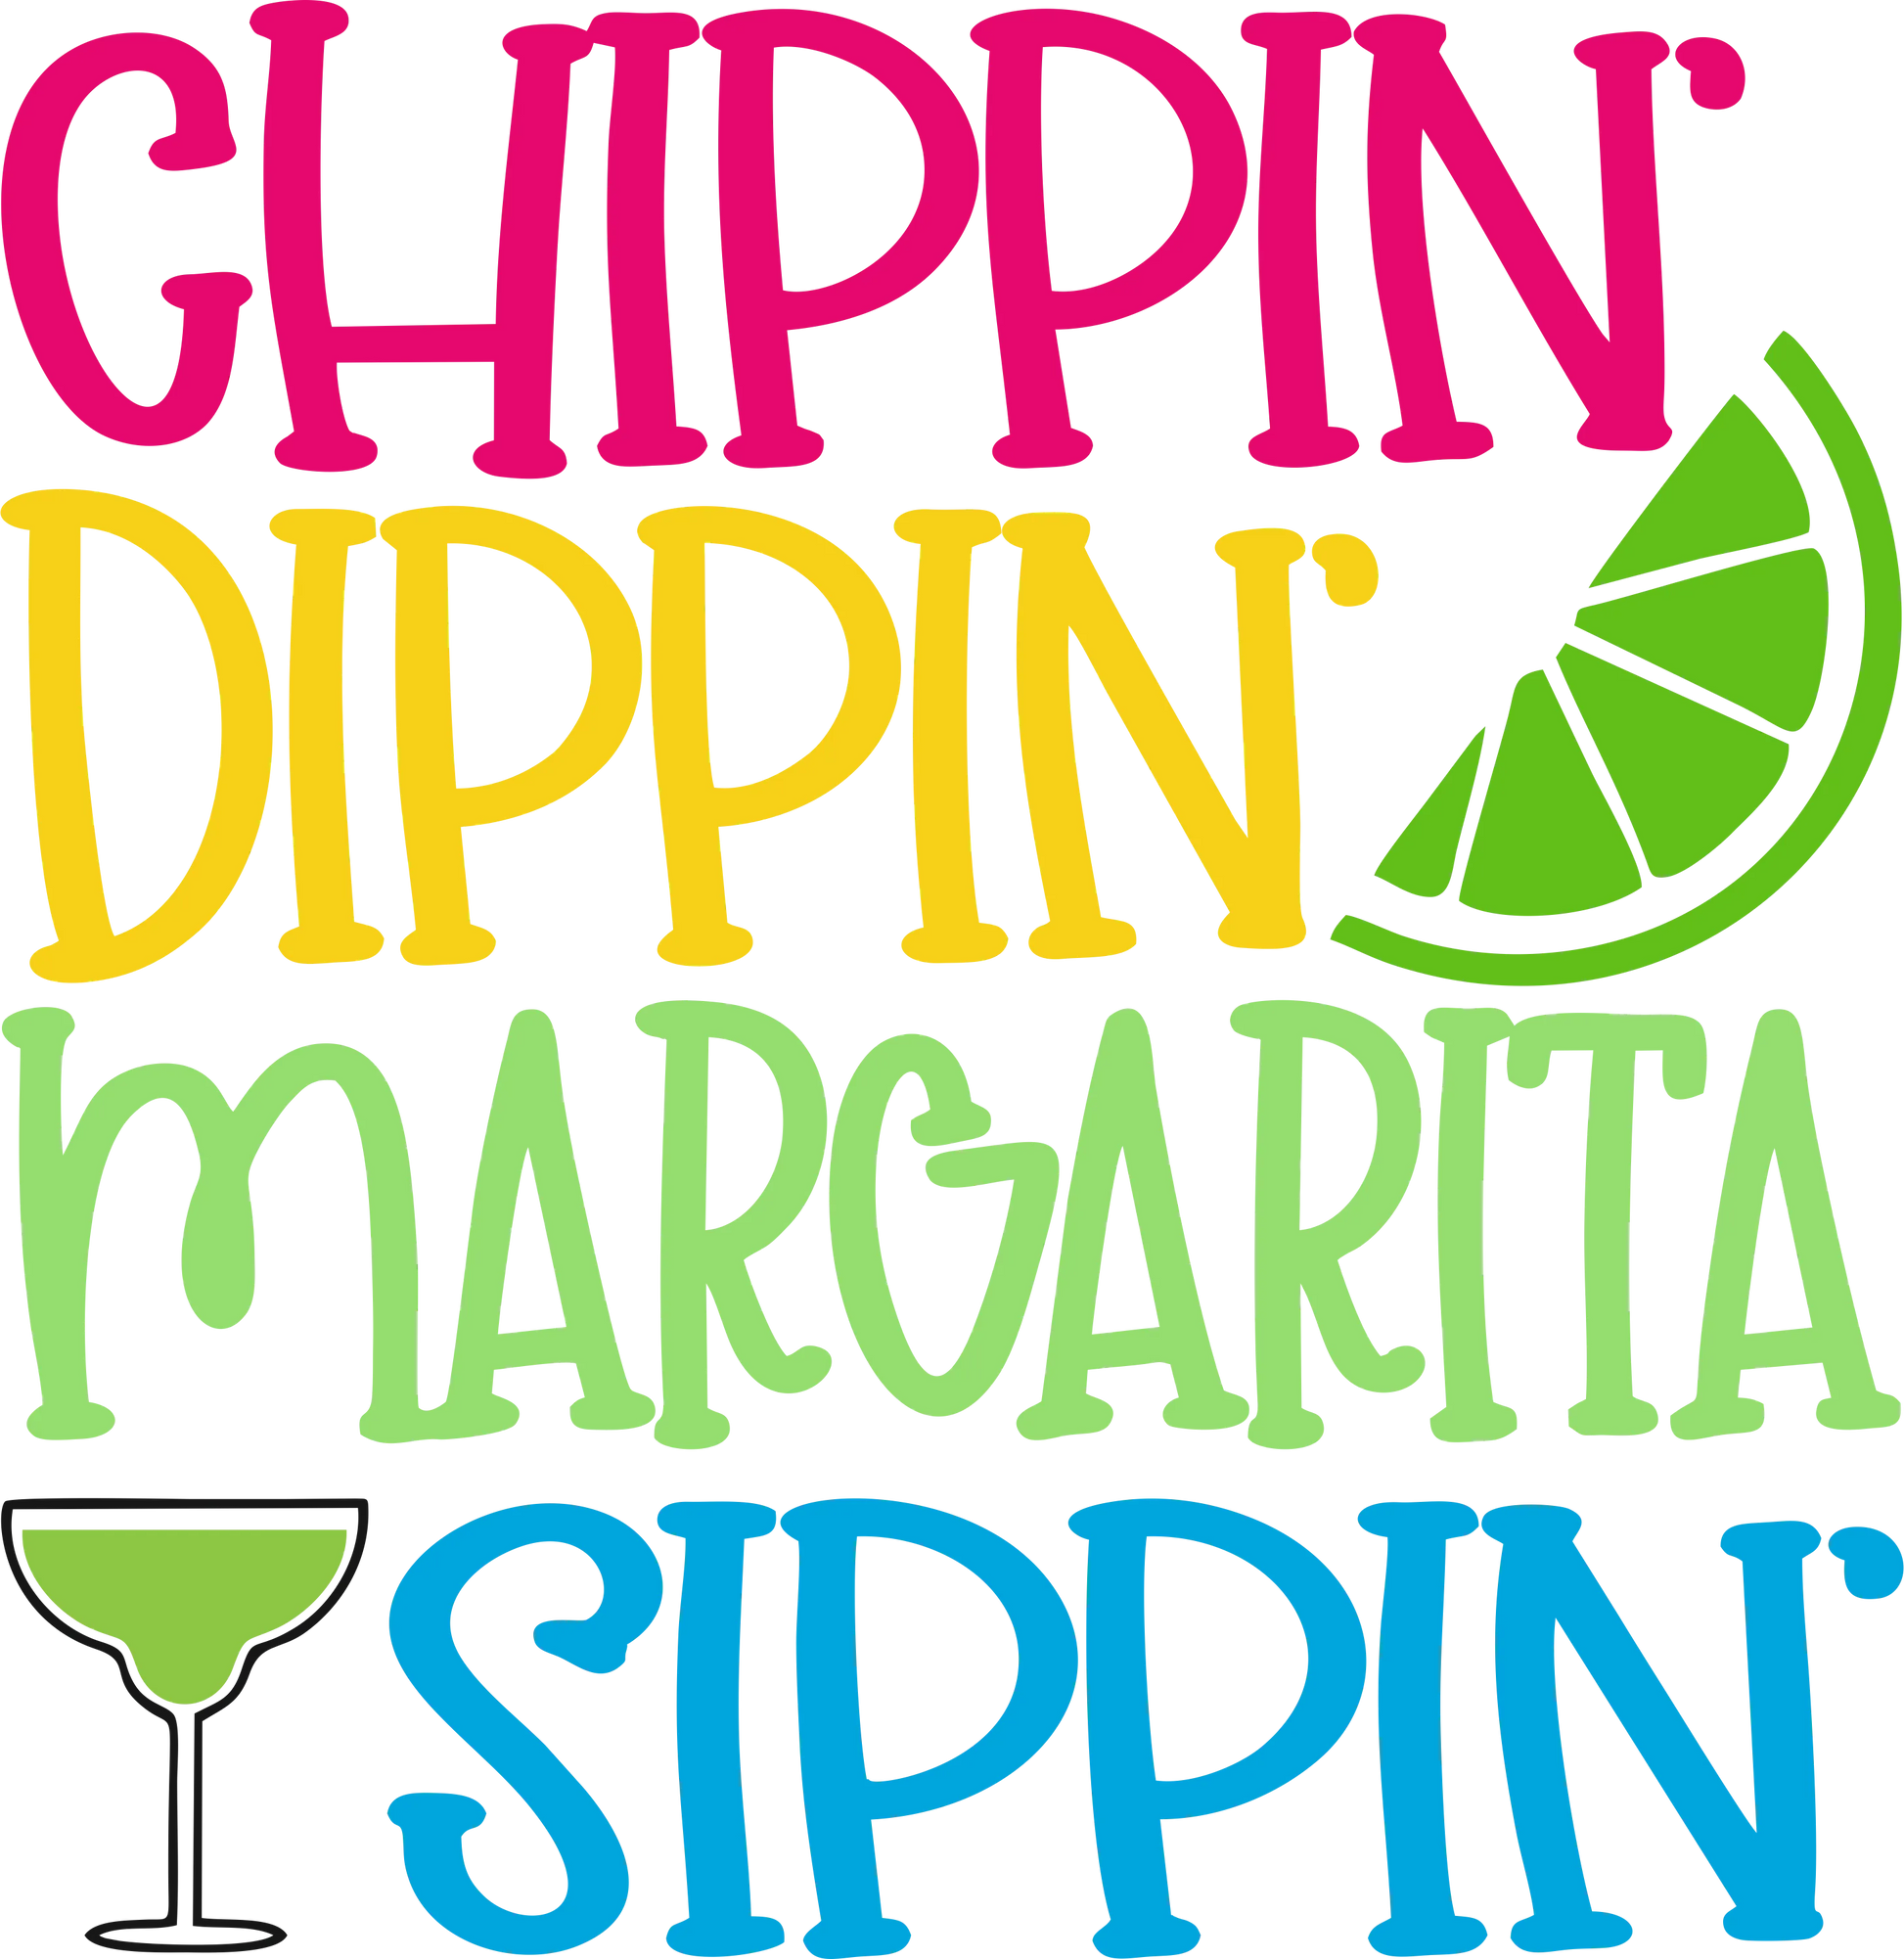 CDM5 - "Chippin Dippin Margarita Sippin" DTF Transfer, DTF Transfer, Apparel & Accessories, Ace DTF